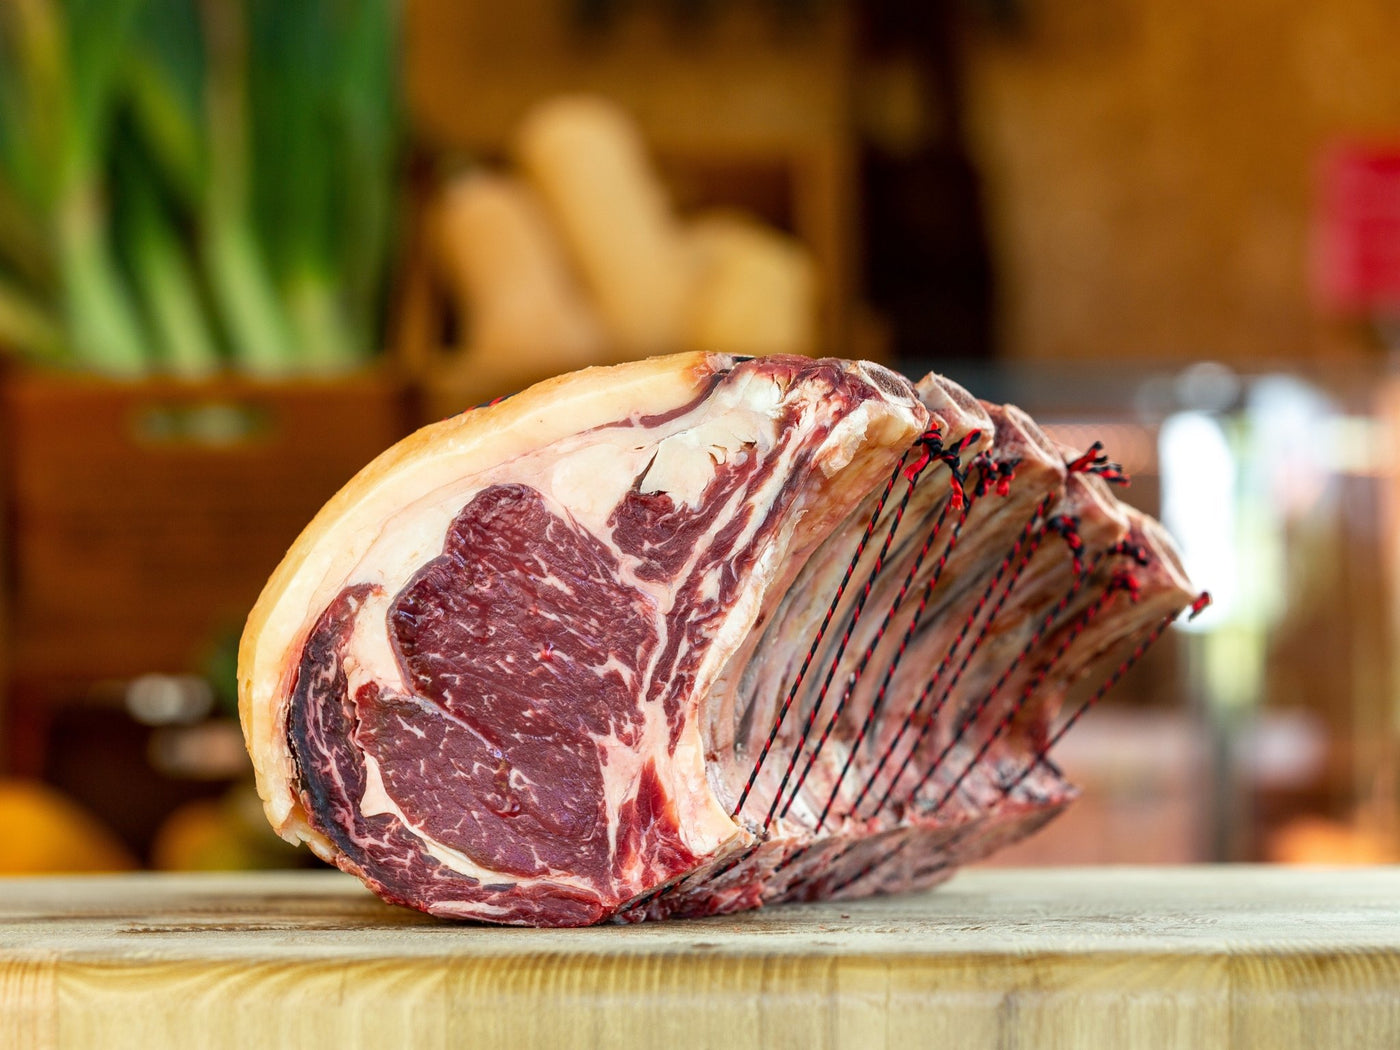 Grass Fed, Dry-Aged Rib Of Beef - Beef - Thomas Joseph Butchery - Ethical Dry-Aged Meat The Best Steak UK Thomas Joseph Butchery